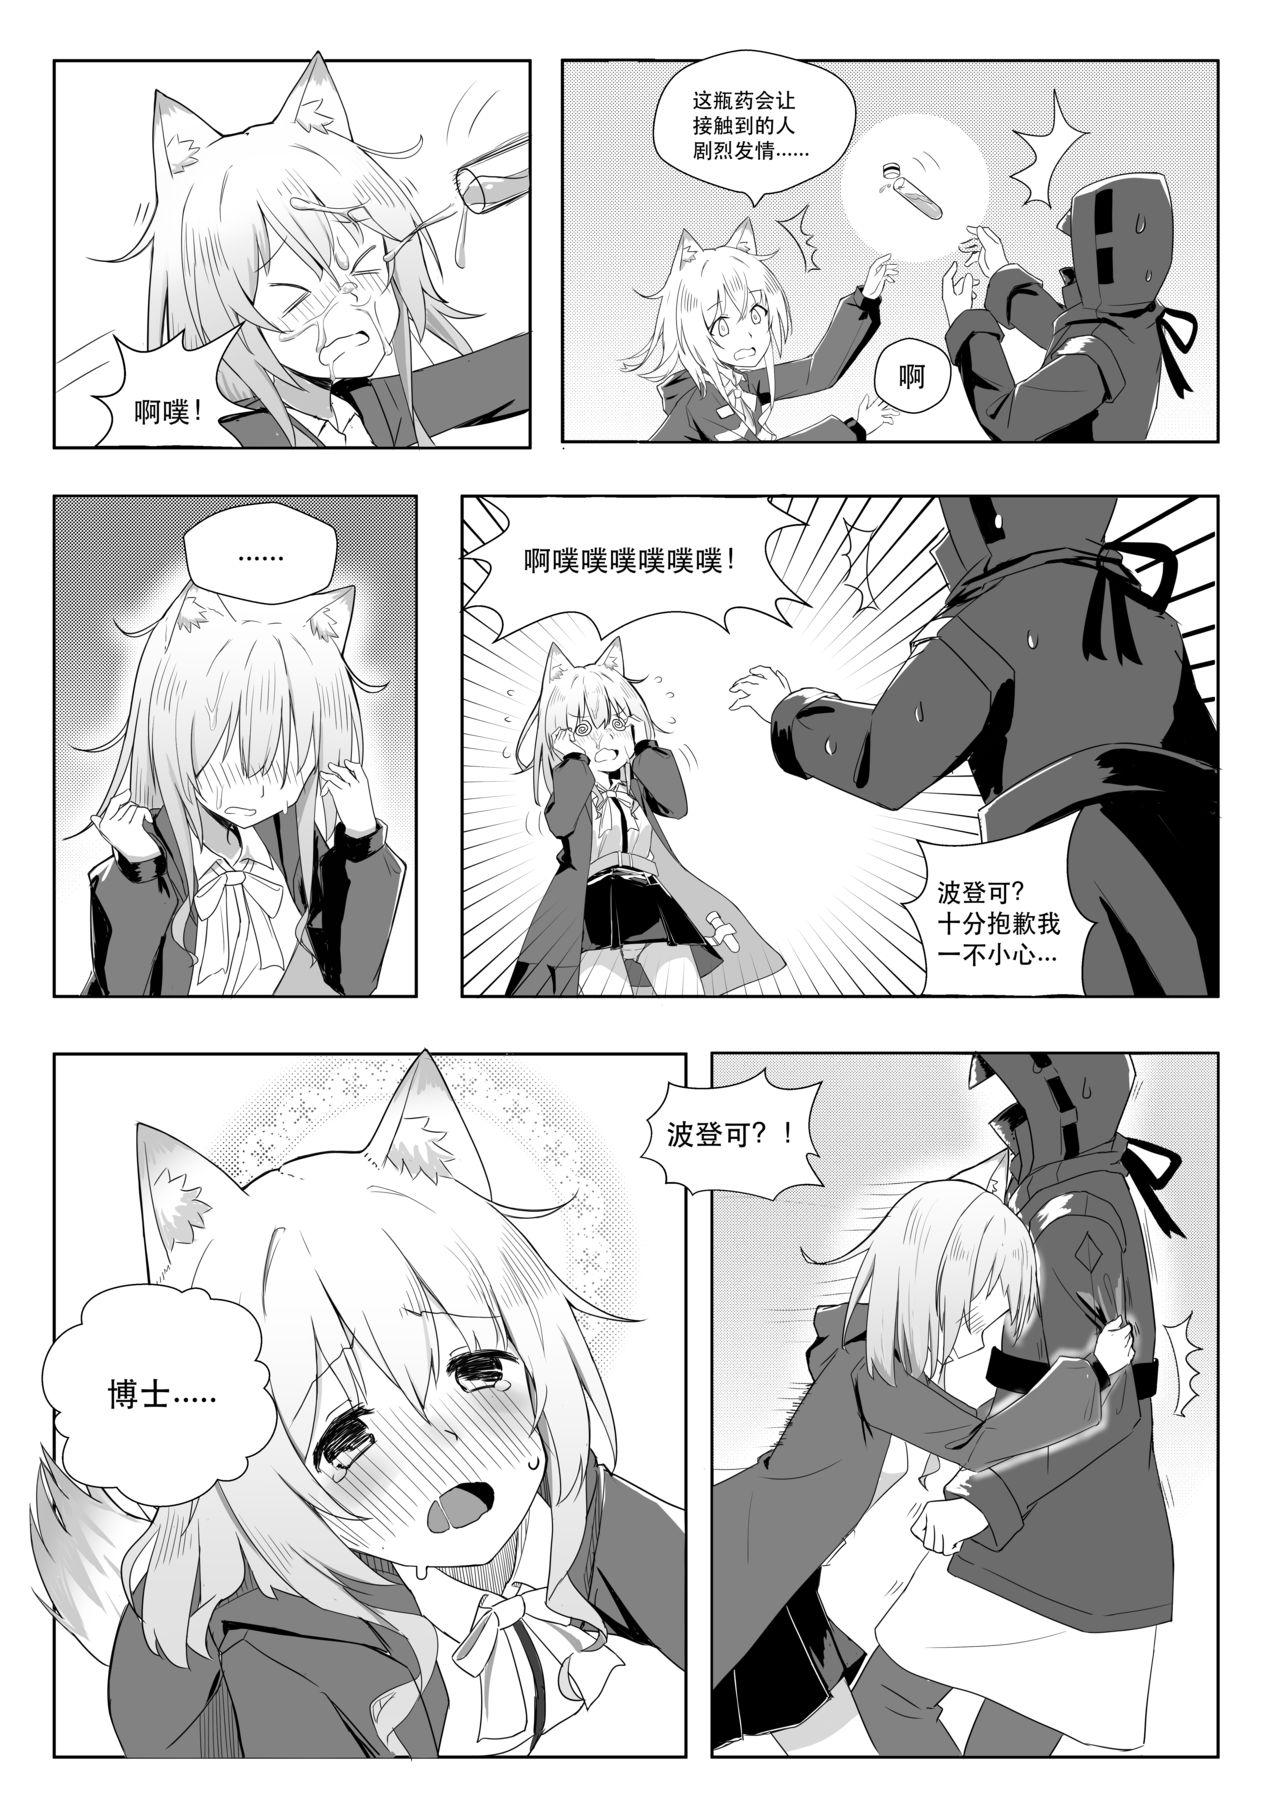 Deep Throat 发情的狗狗波登可 - Arknights Fuck For Cash - Page 4